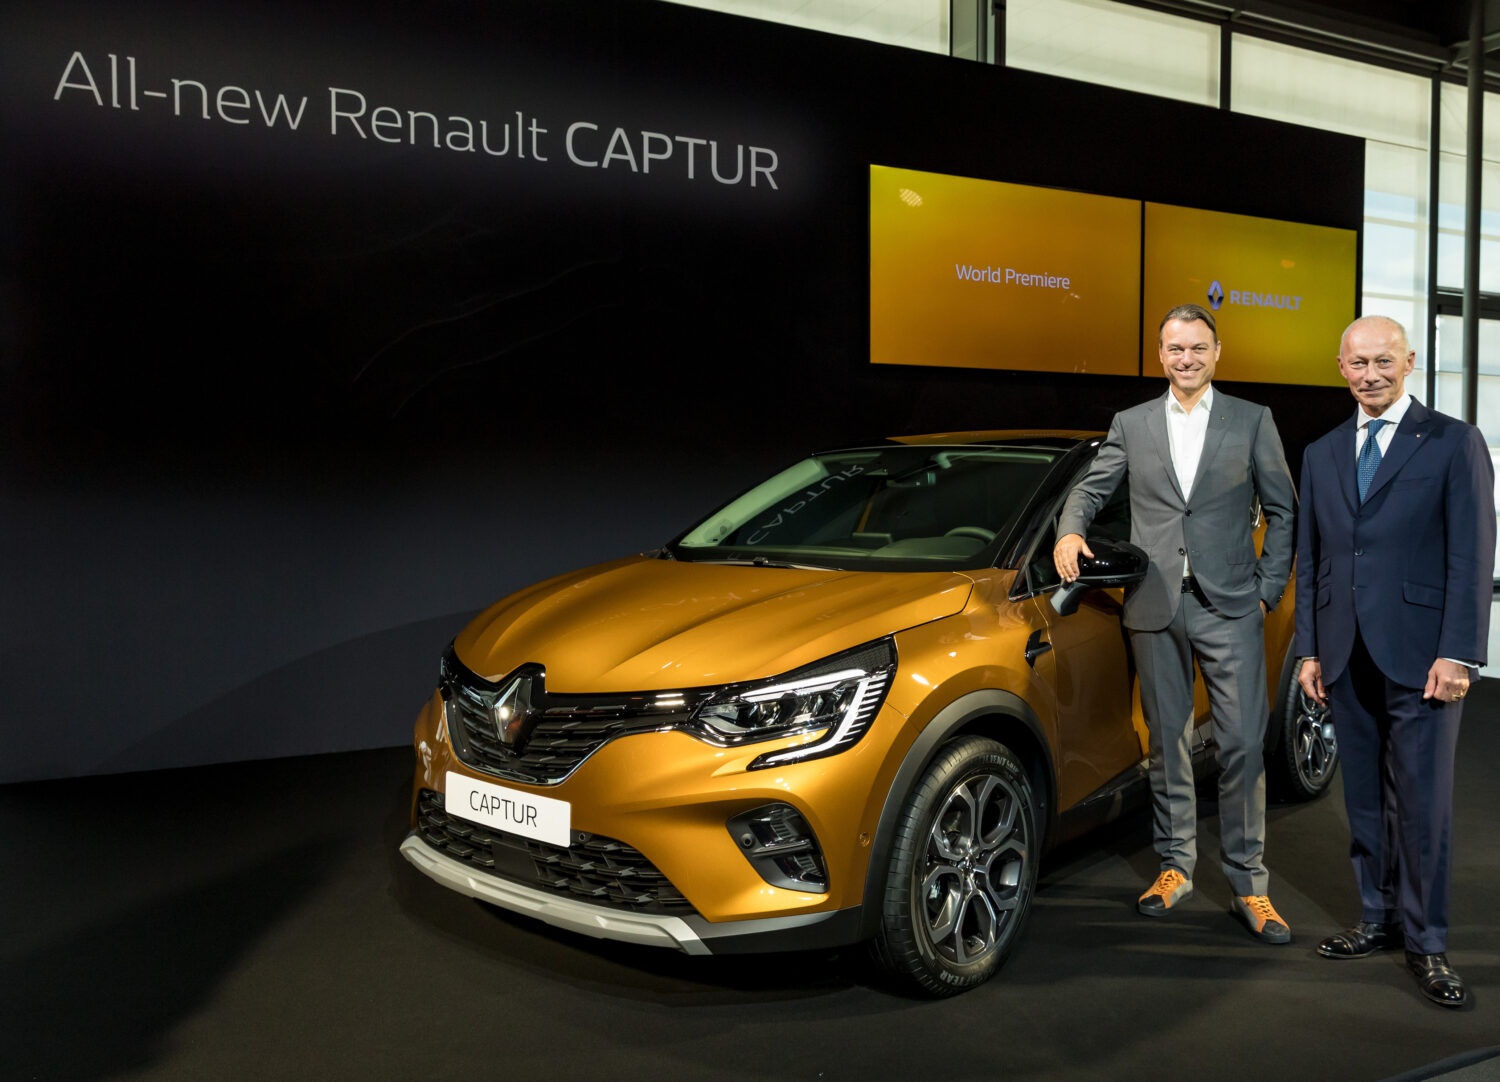 2019 - The All-New Renault CAPTUR presented At the Frankfurt Motor Show